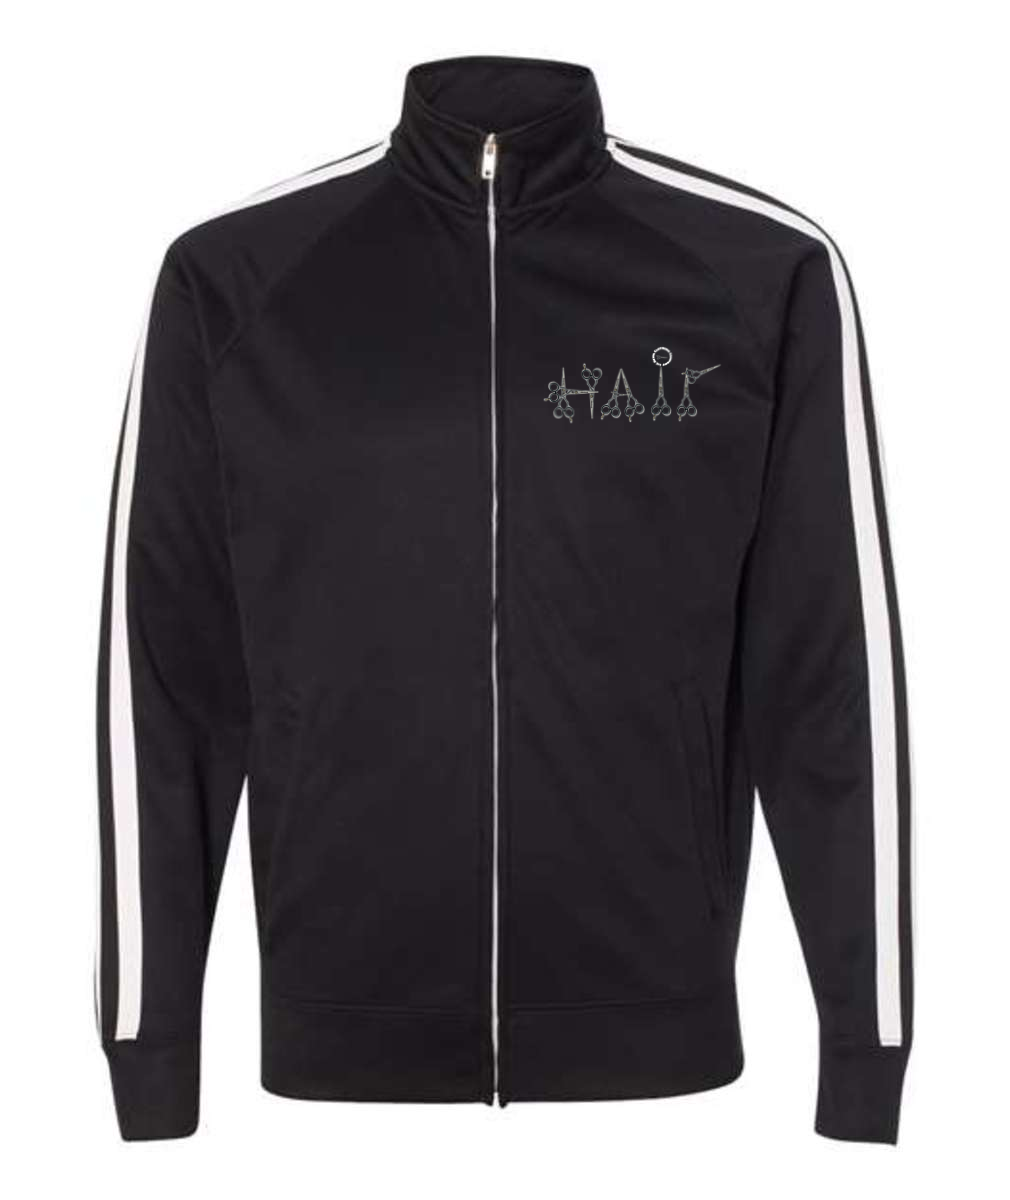 Hair print Independent Trading Co. - Unisex Lightweight Poly-Tech Full-Zip Track Jacket Embroidered